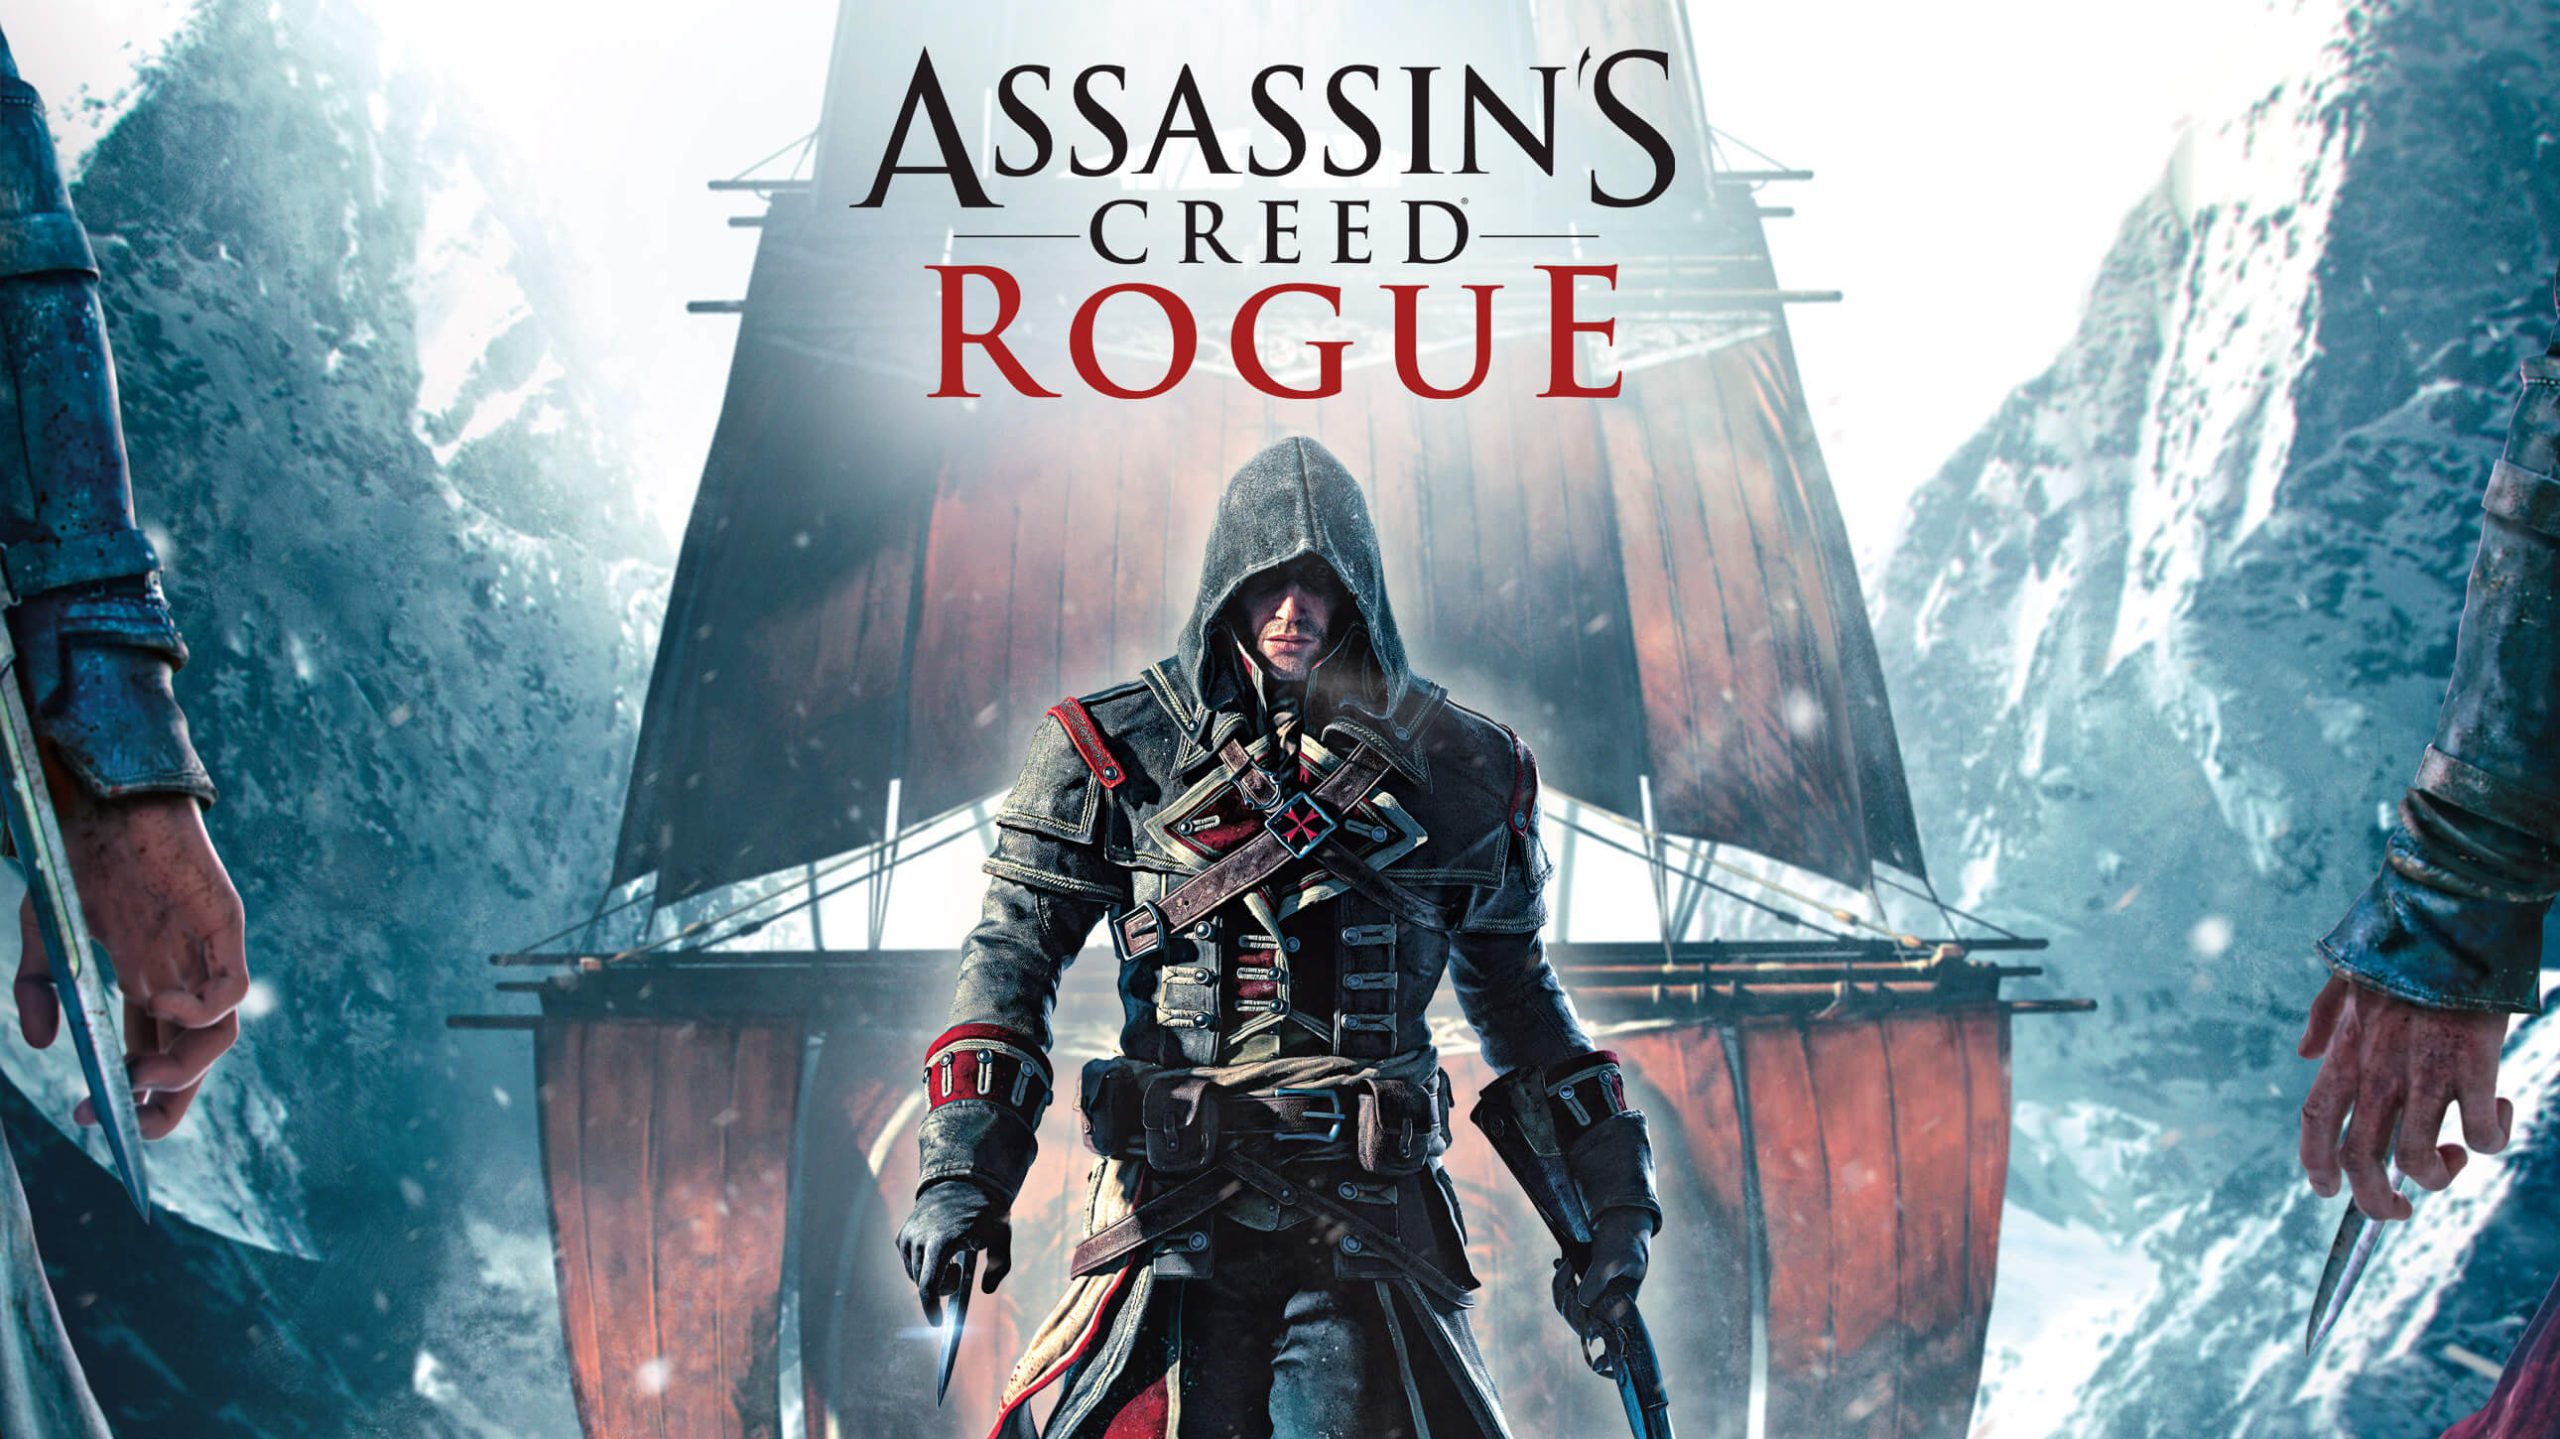 diesel_productv2_assassins-creed-rogue_home_acrg_store_landscape_2580x1450-2580x1450-e15109bbf6511d3cdf944a1e7ba9d007c0883035